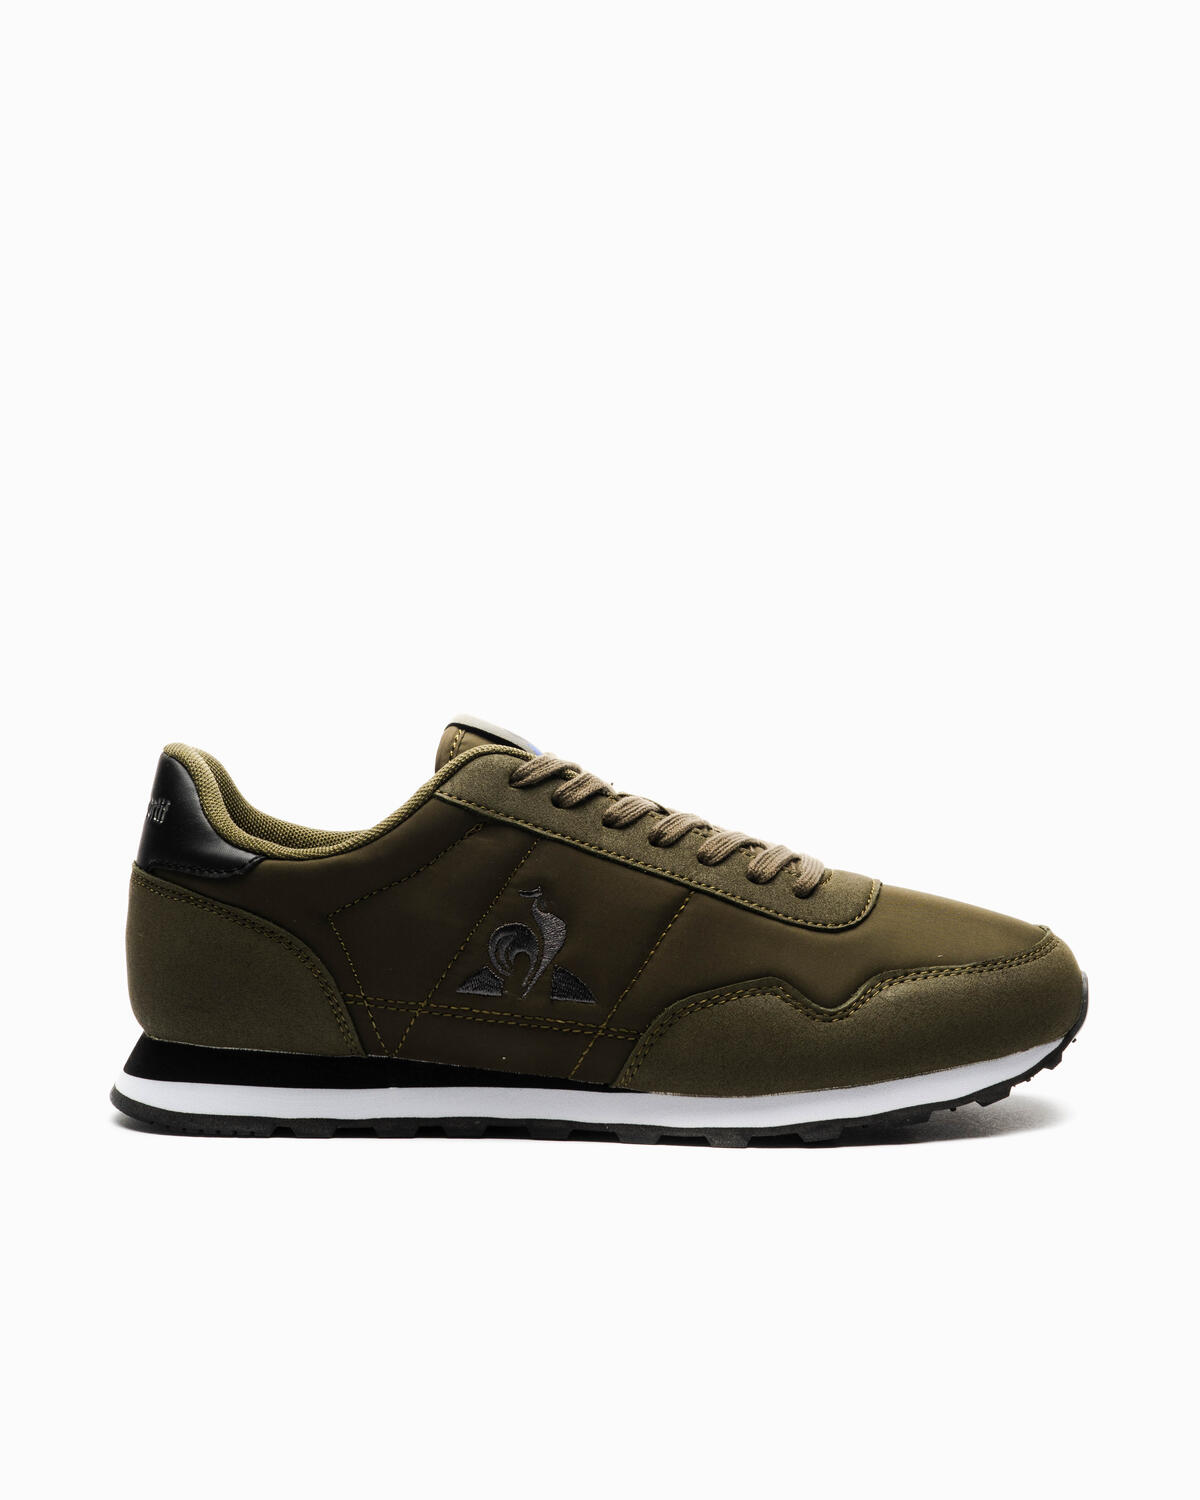 Le Coq Sportif Astra | 2120193 | AFEW STORE